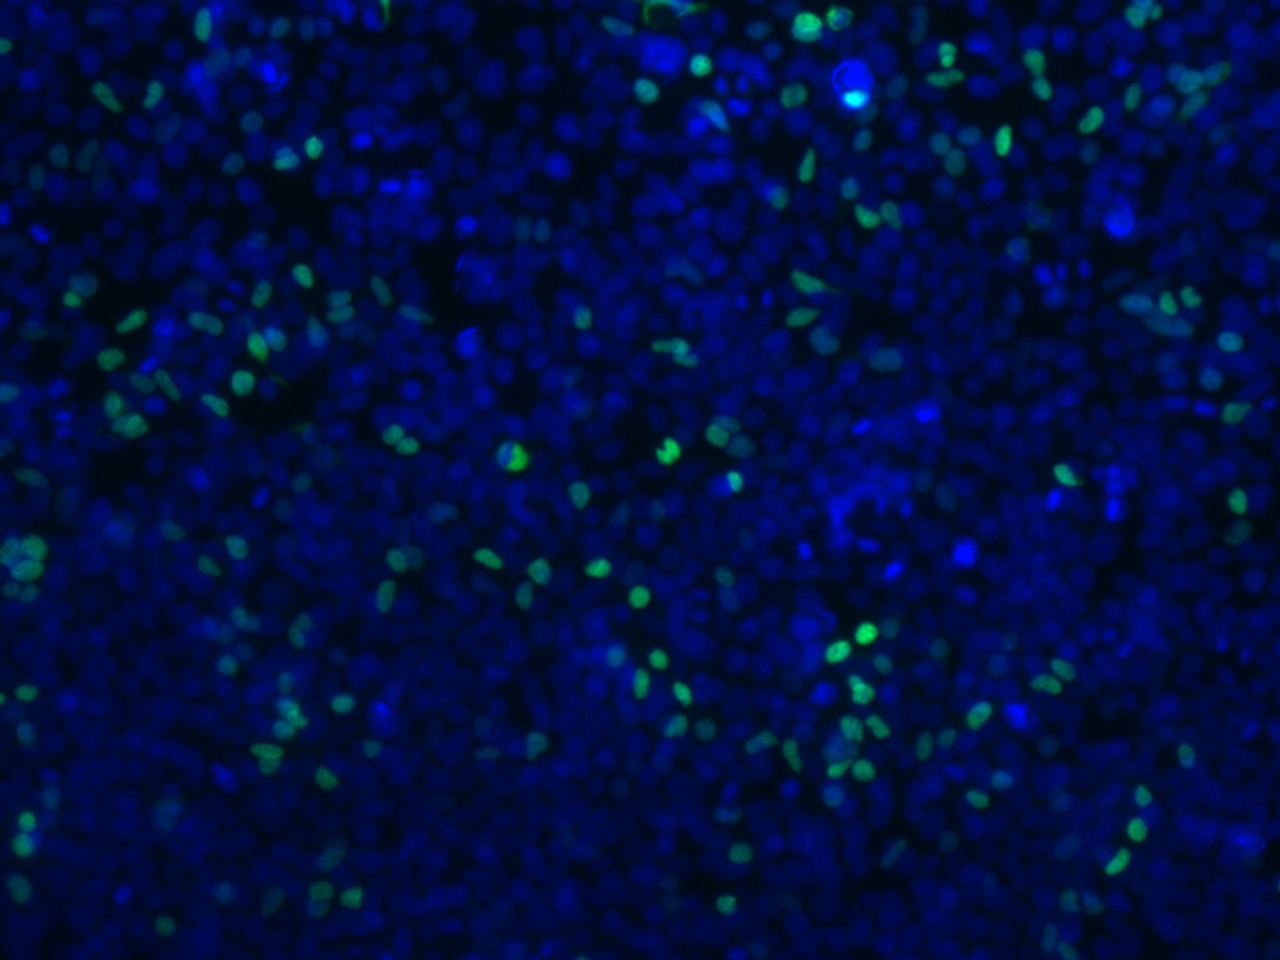 Immunofluorescence (IF) / fluorescent staining of Transfected HEK-293 cells using DYKDDDDK tag Recombinant antibody (Binds to FLAG®  (80010-1-RR)